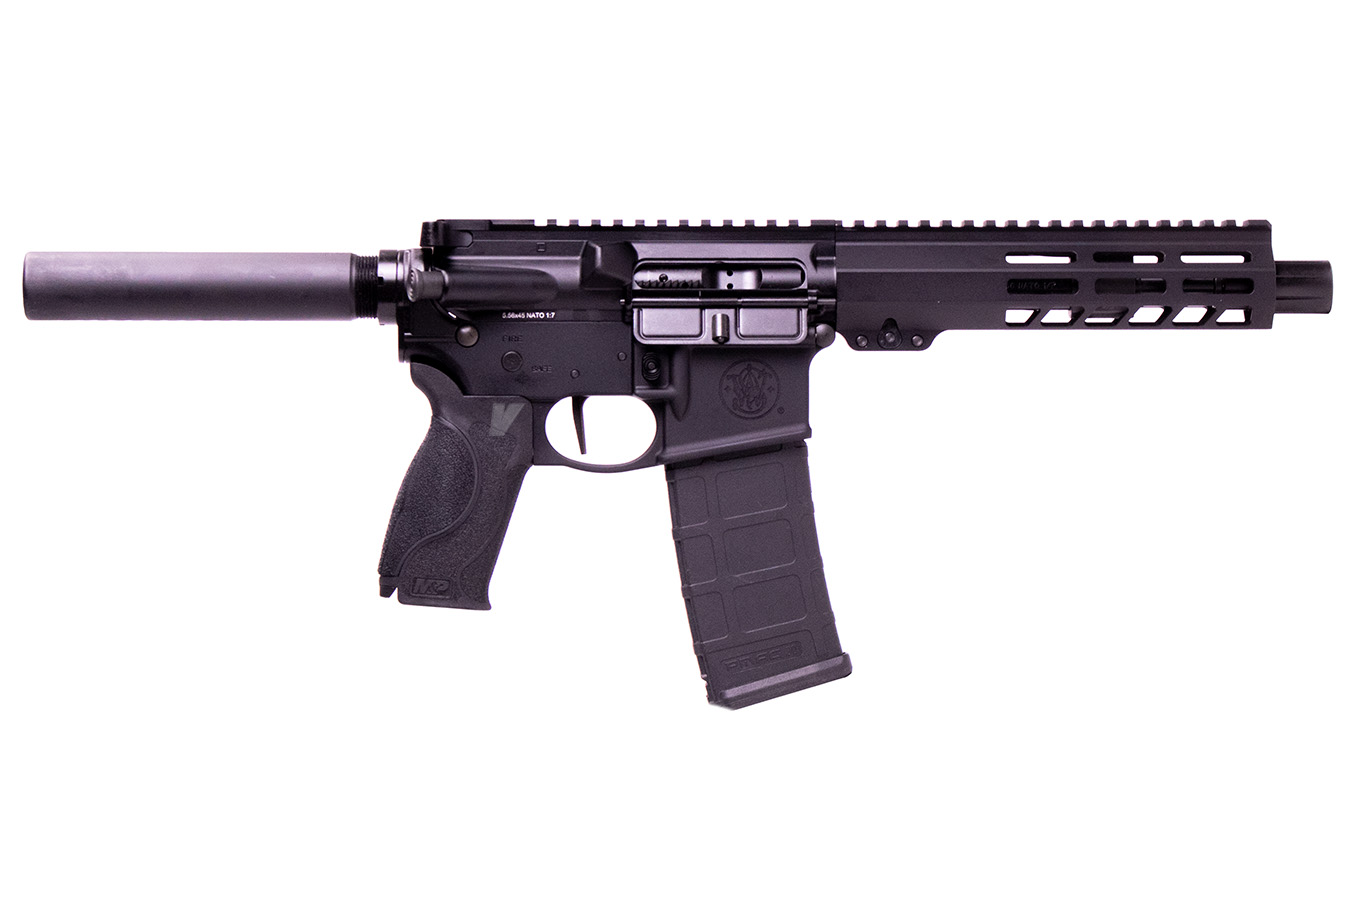 SMITH AND WESSON MP15 5.56MM AR PISTOL WITH FLAT TRIGGER